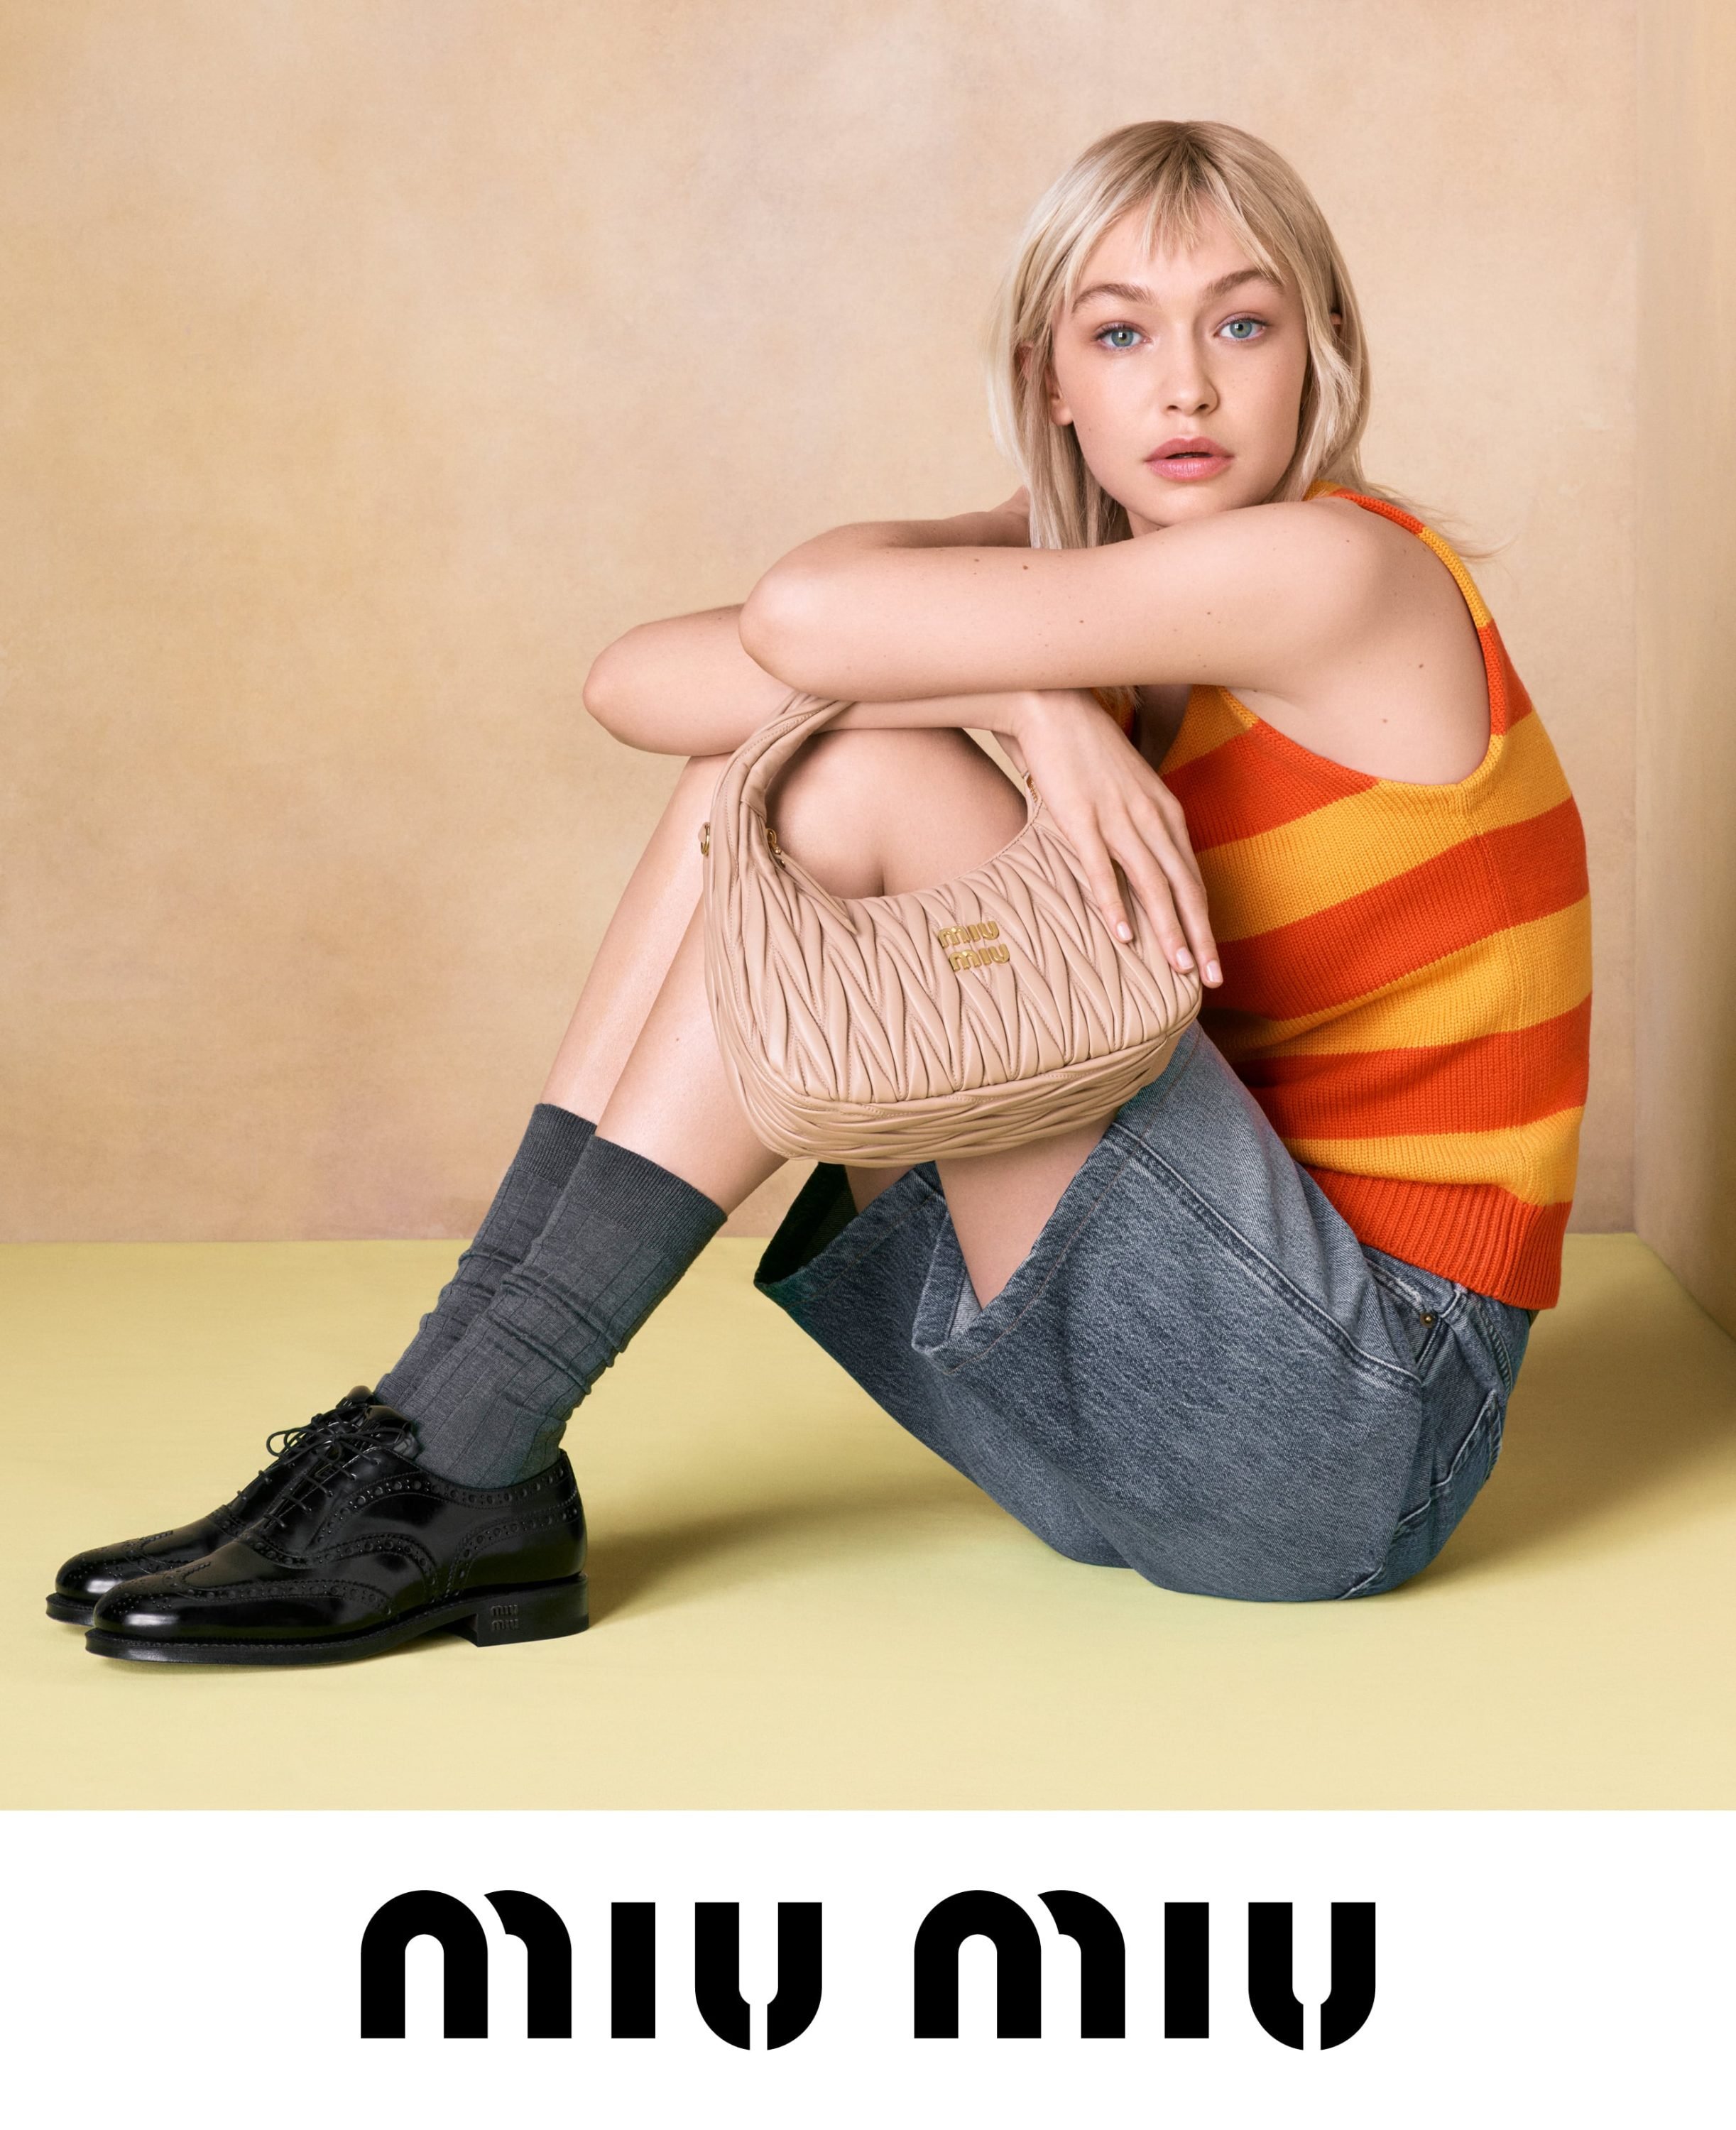 Miu Miu Launches Campaign with Gigi Hadid, Lensed by Steven Meisel – WWD